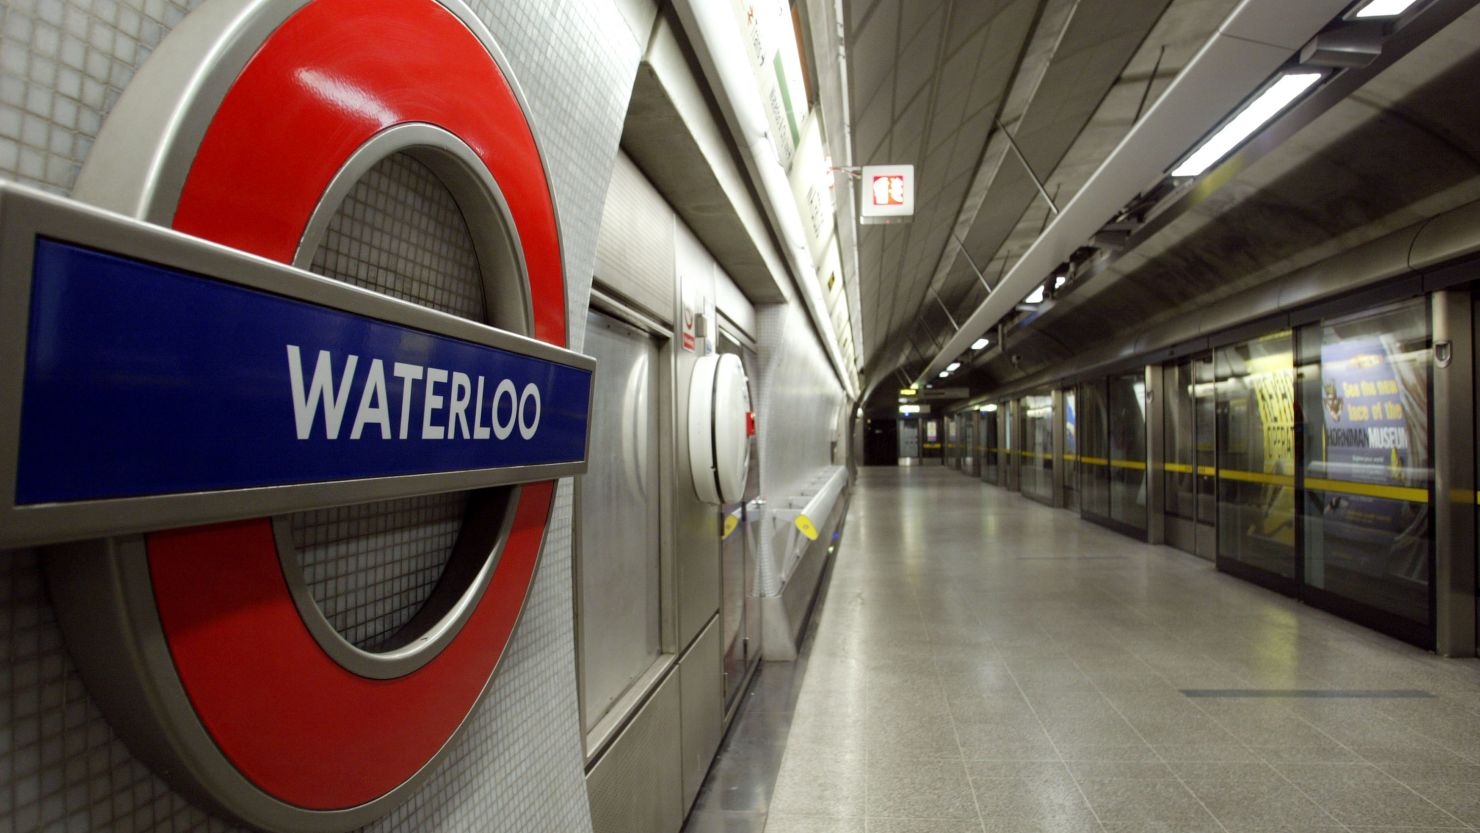 Waterloo Station in London, to which the three men were traveling.